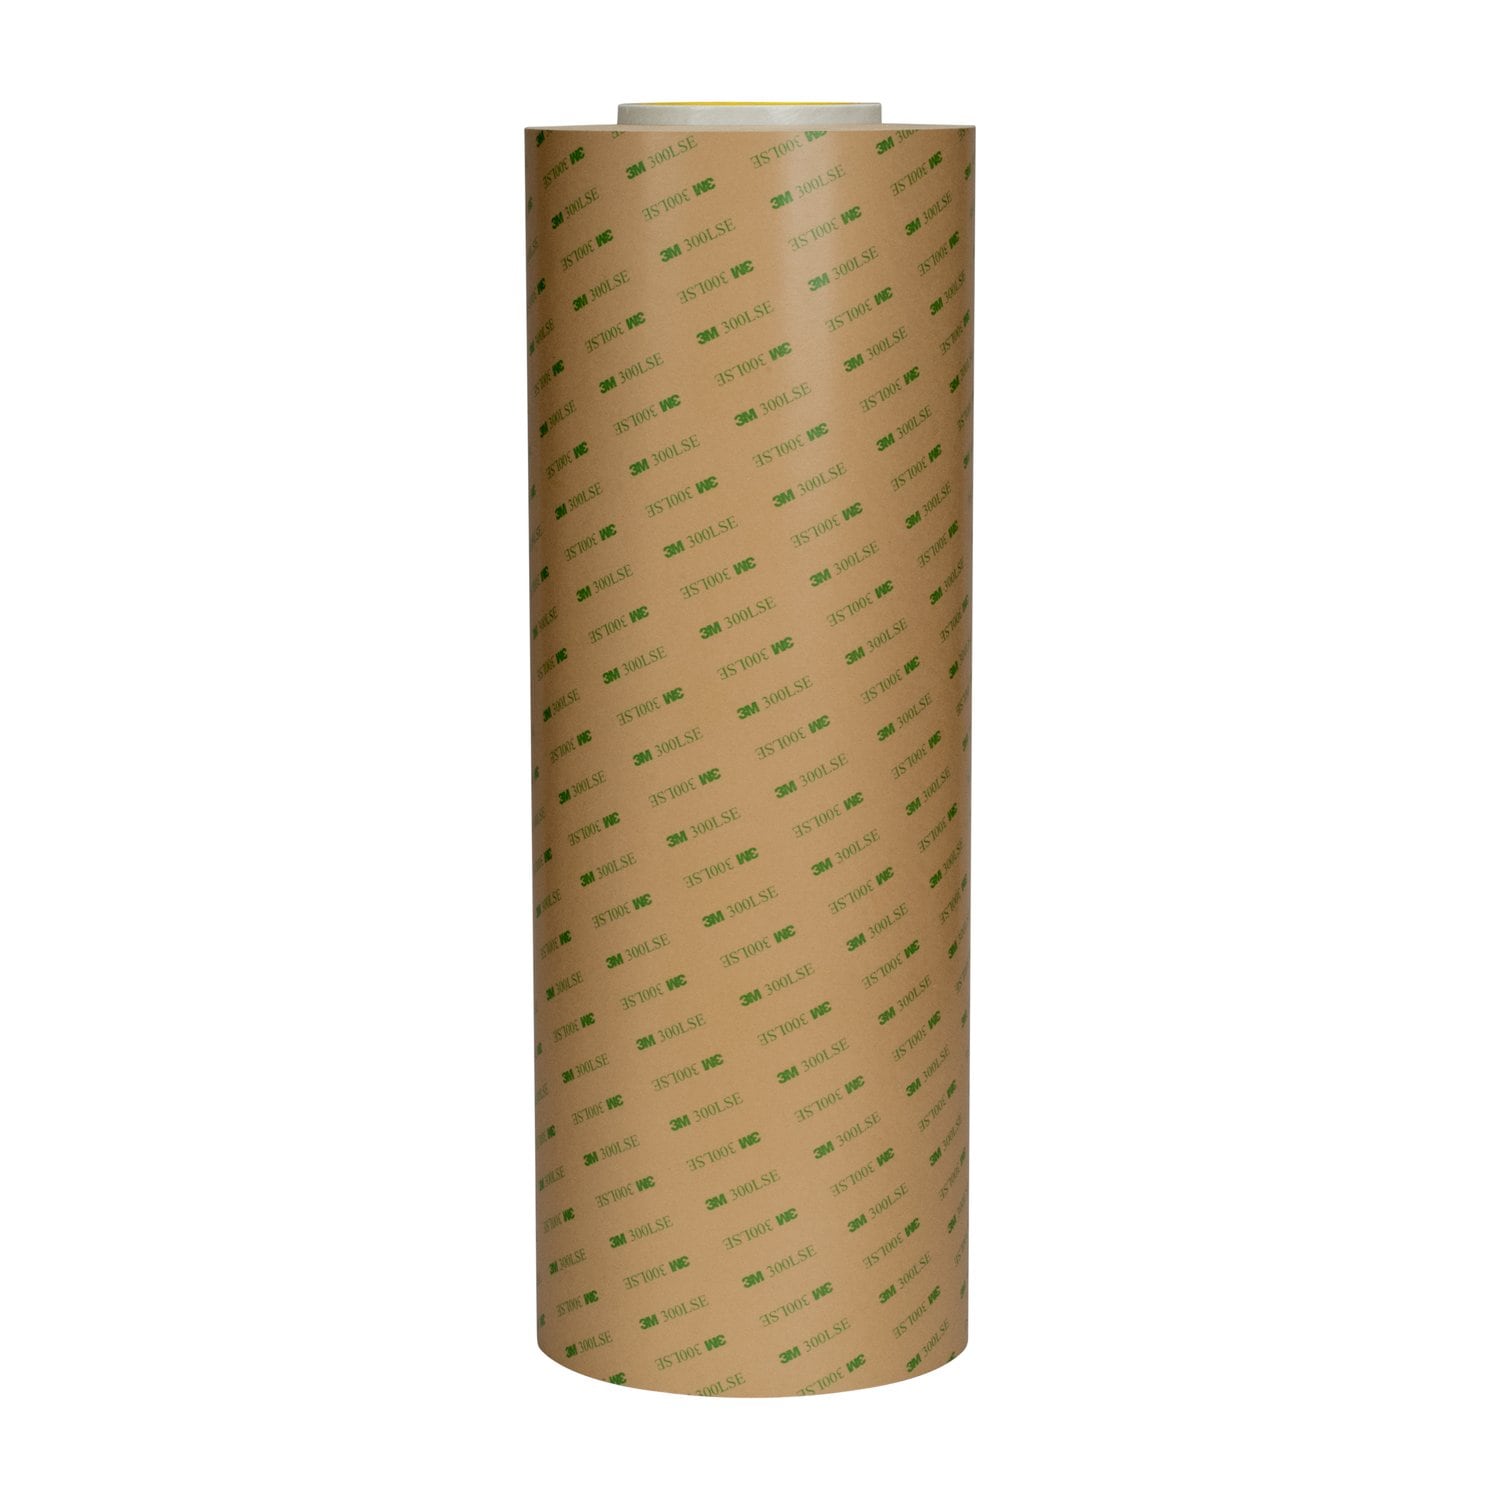 7100009996 - 3M Adhesive Transfer Tape 9671LE, Clear, 2 mil, Roll, Config